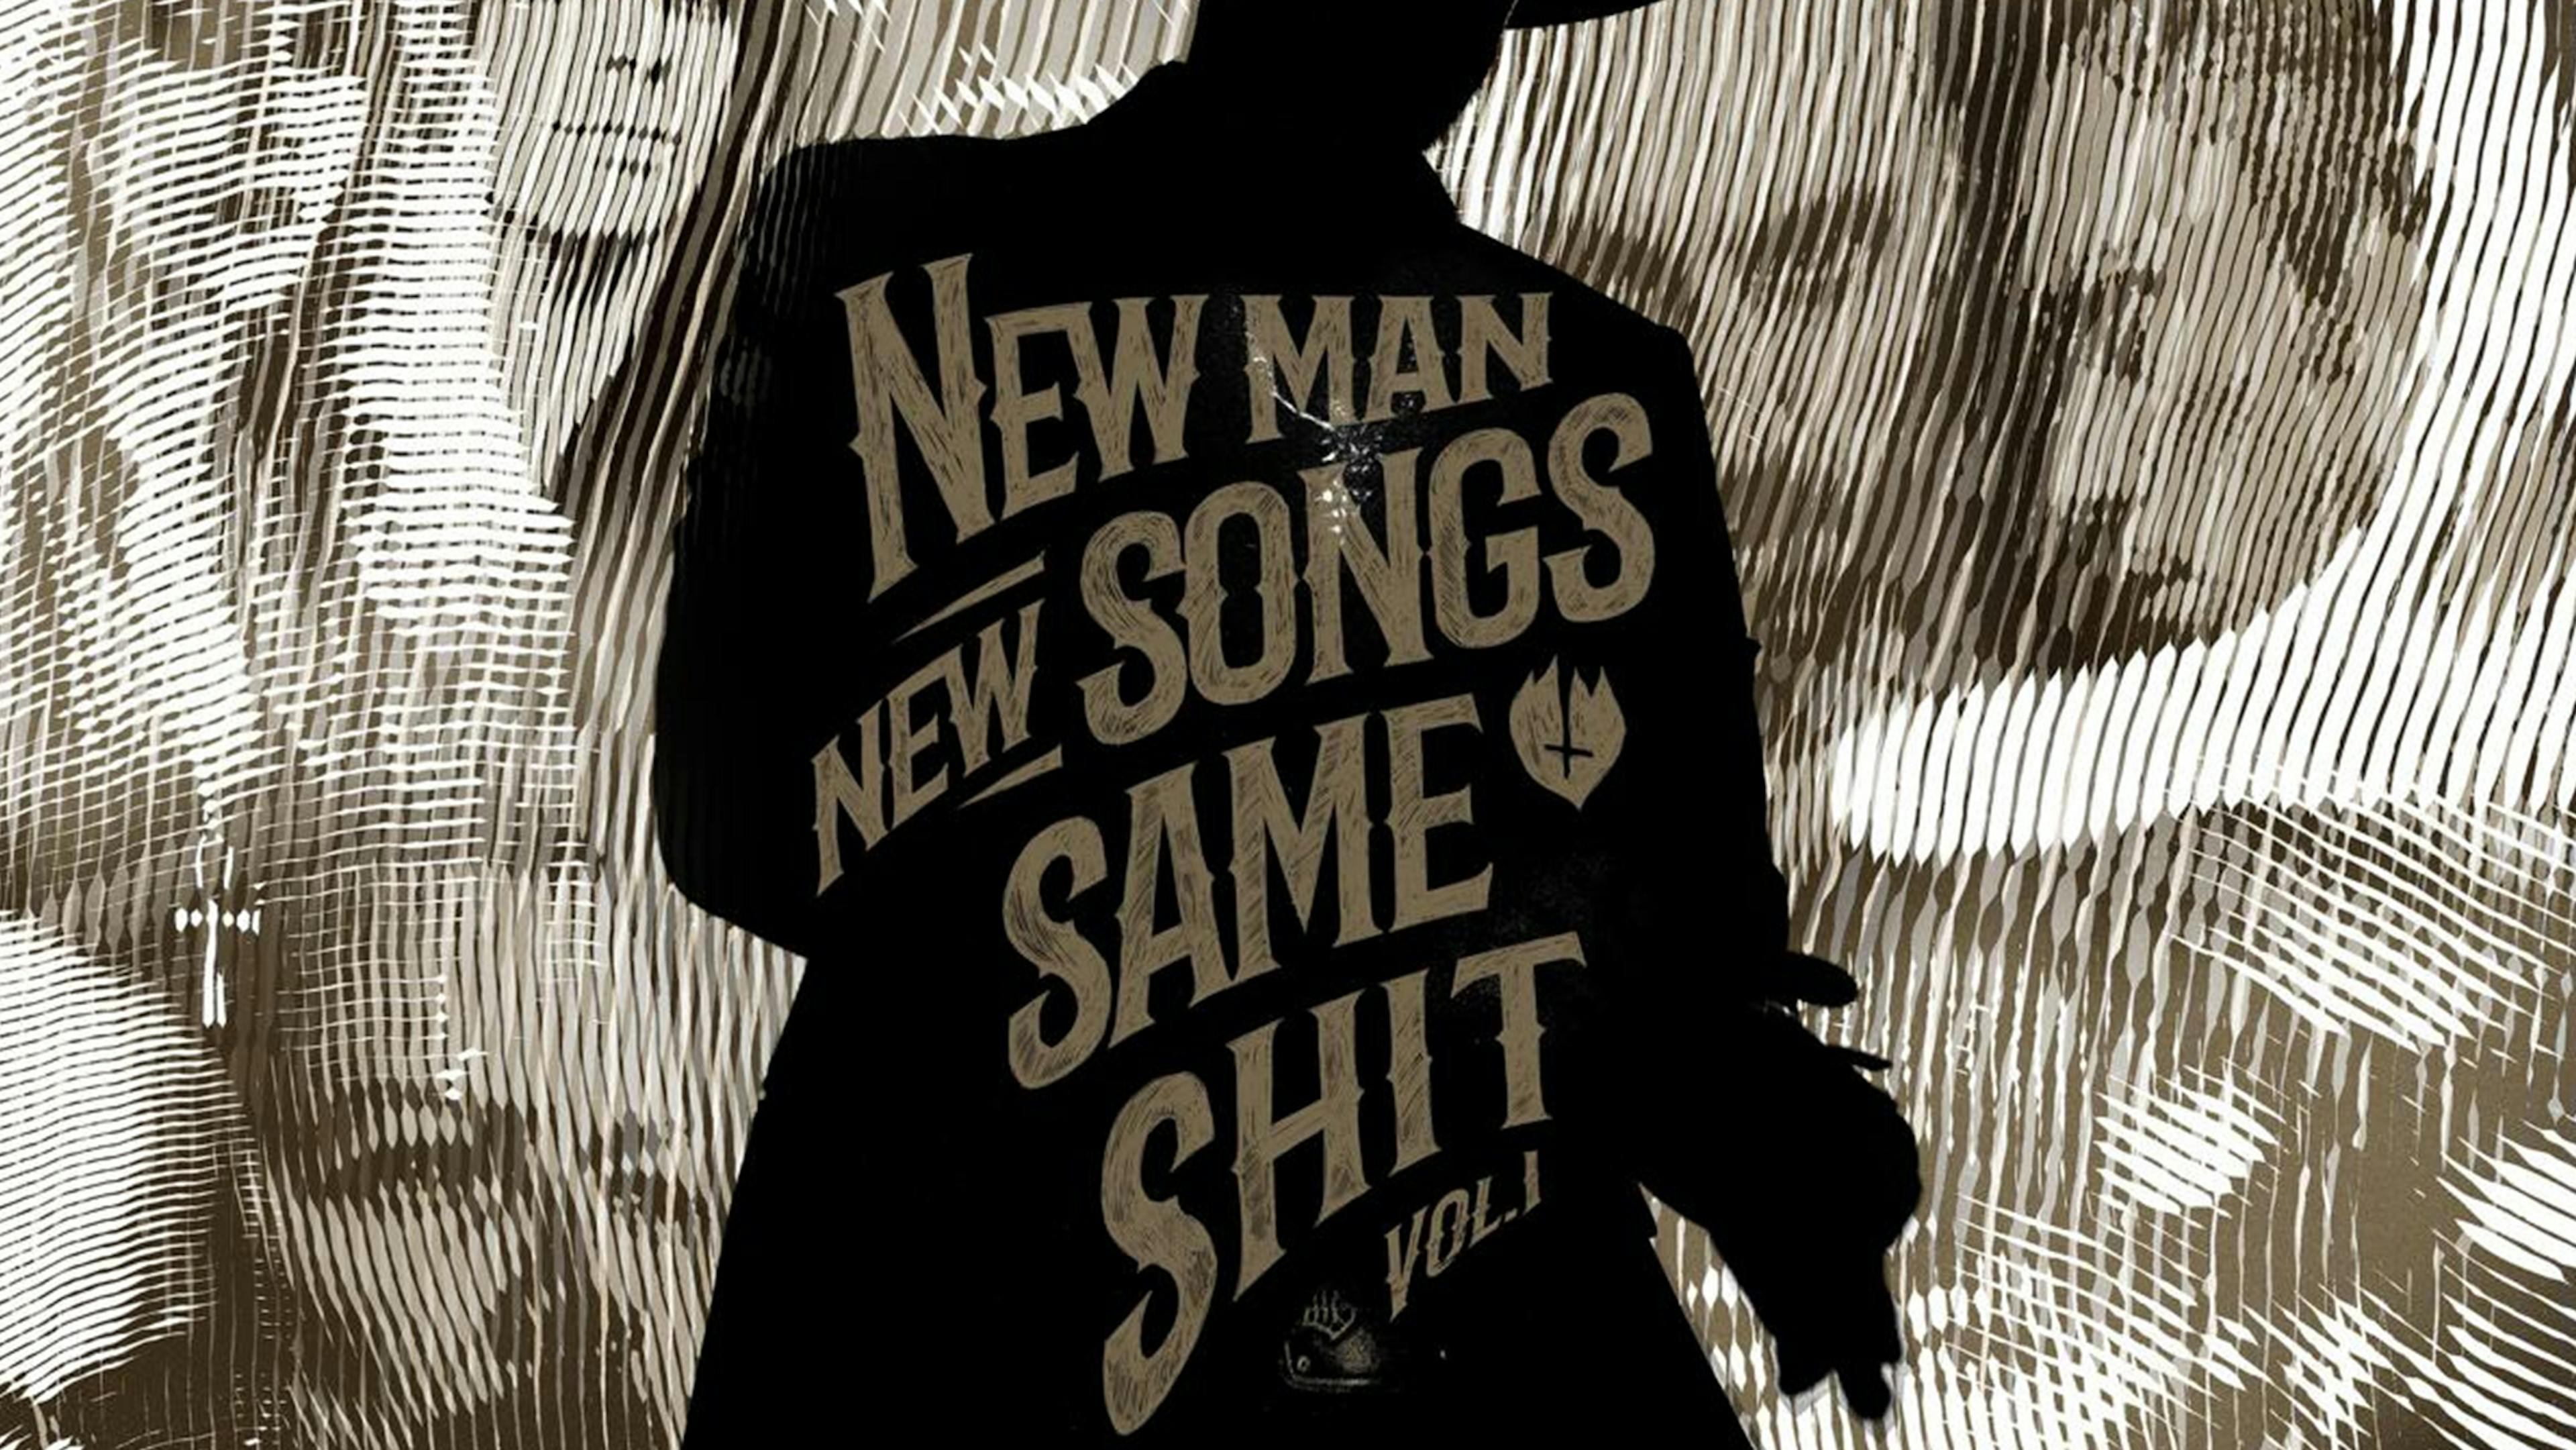 Album Review: Me And That Man – New Man, New Songs, Same Shit Vol 1